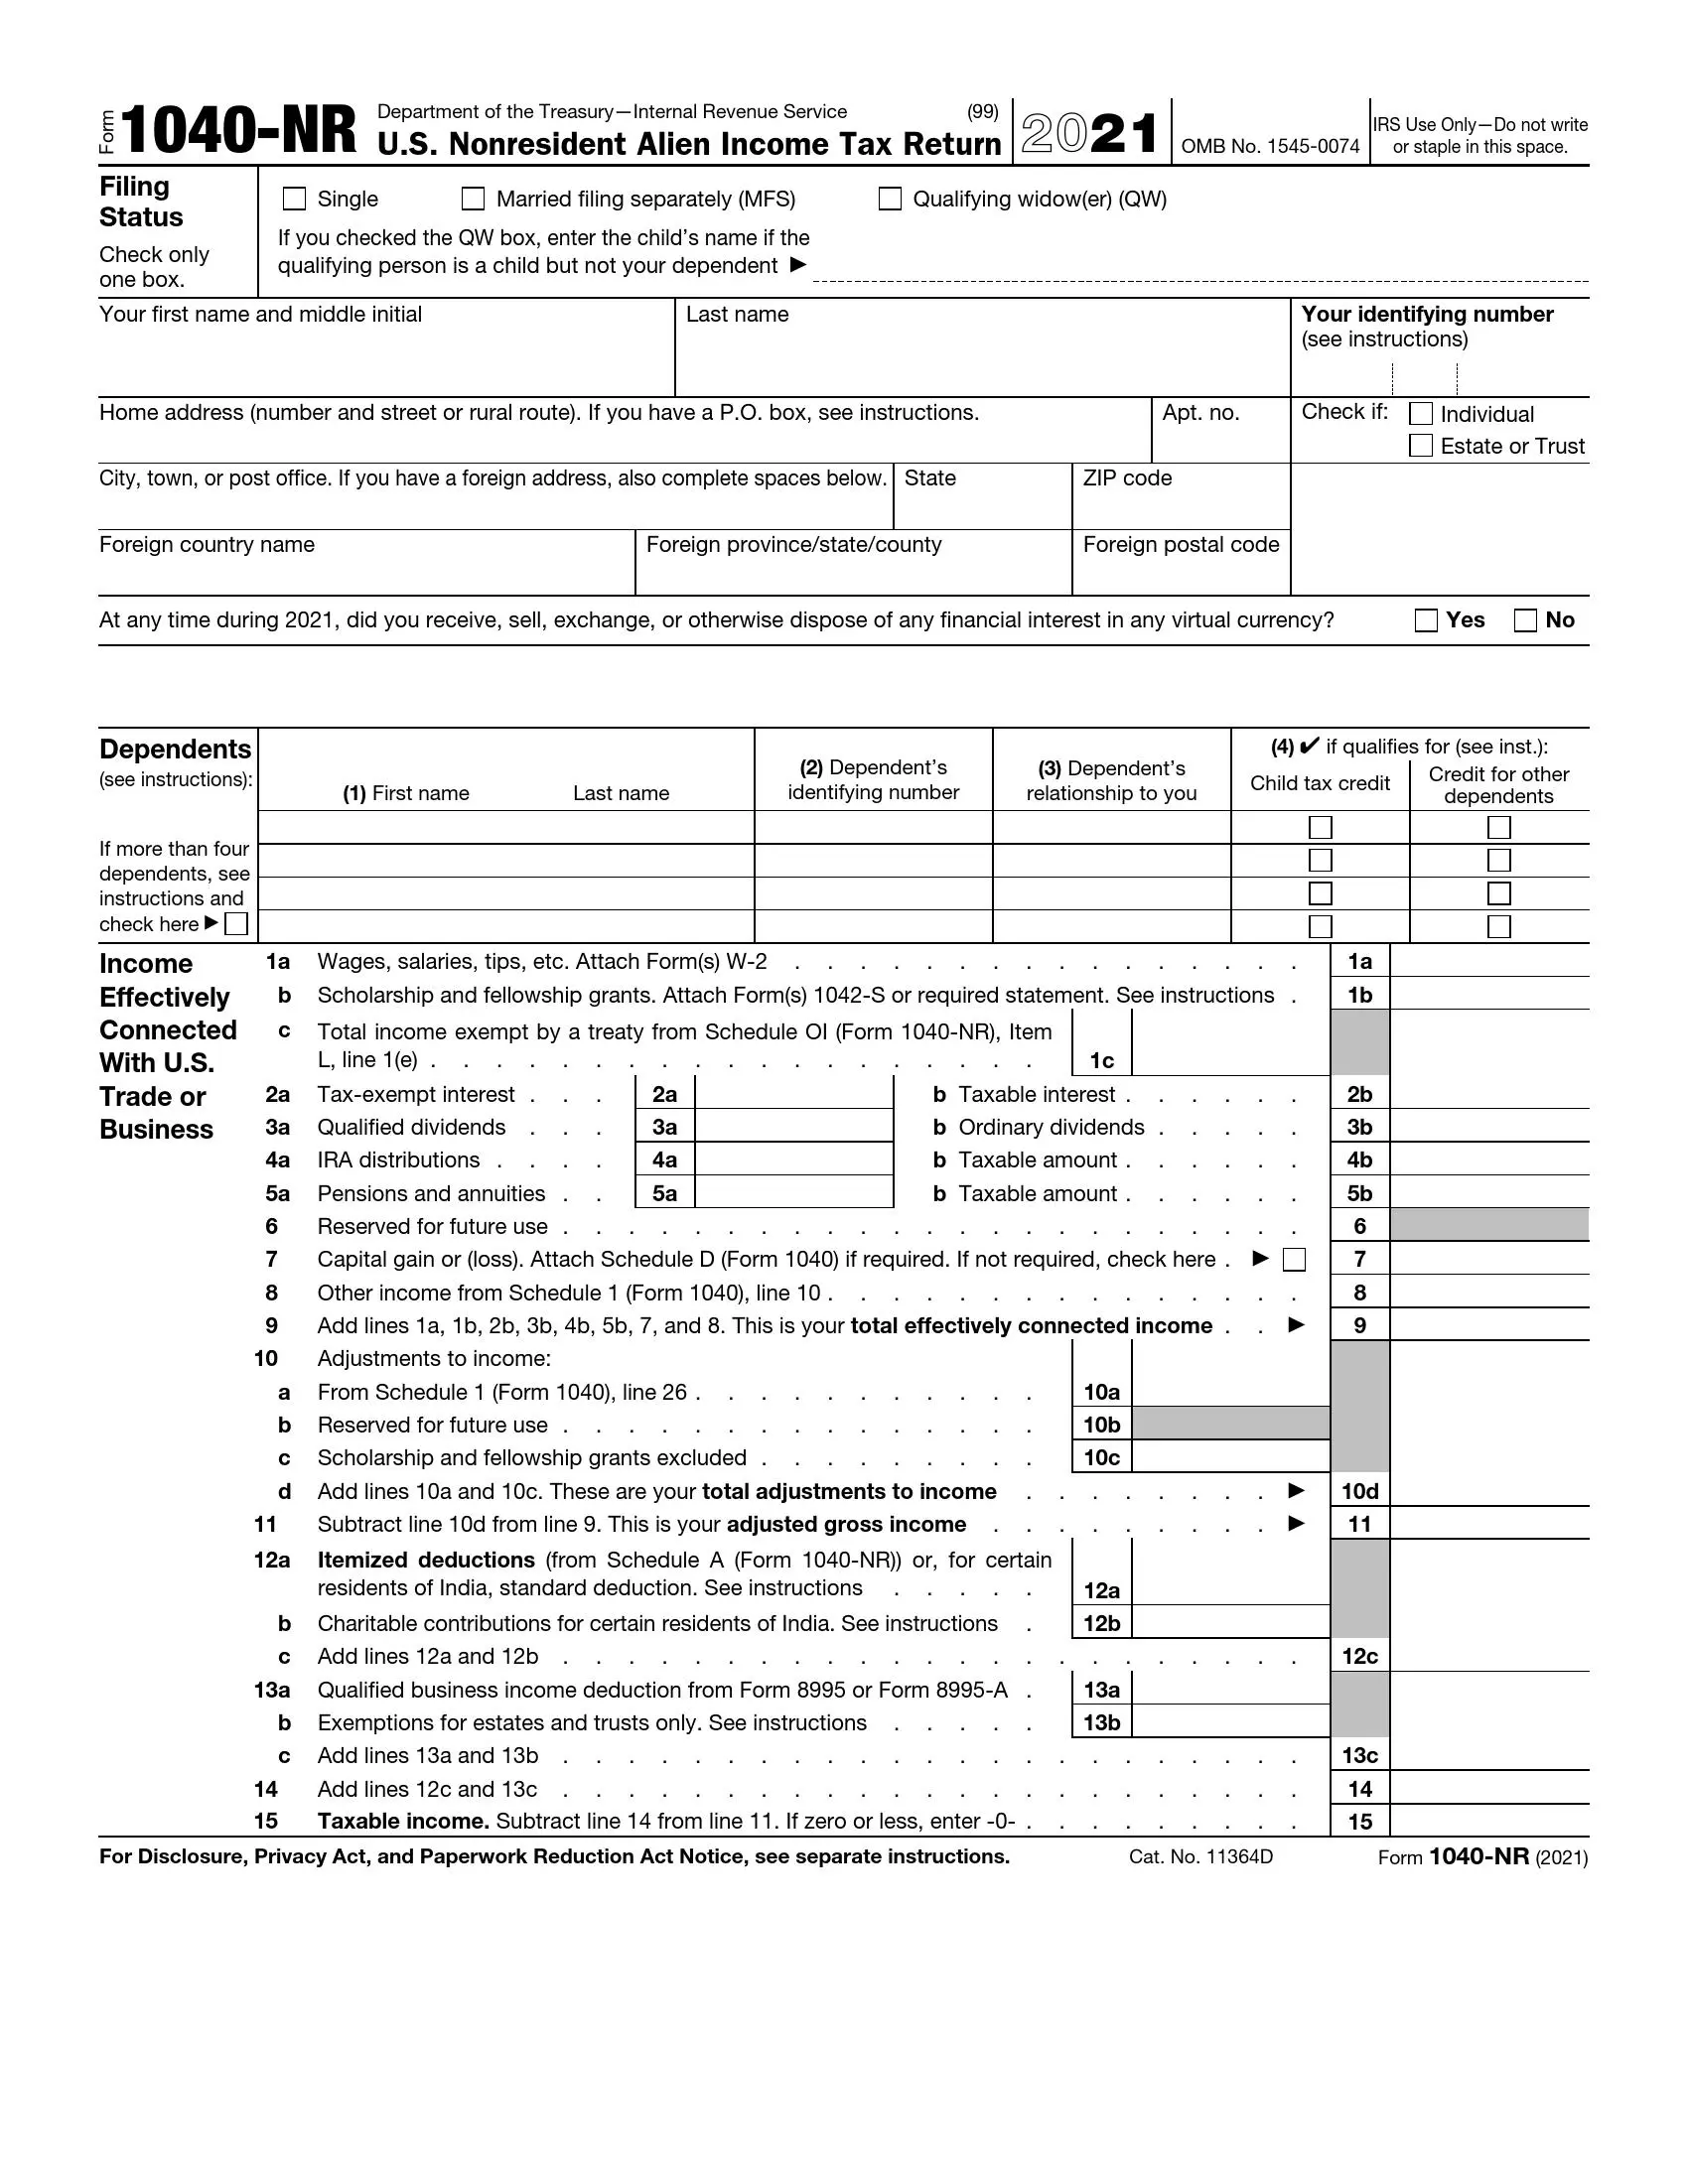 irs form 1040-nr 2021 preview